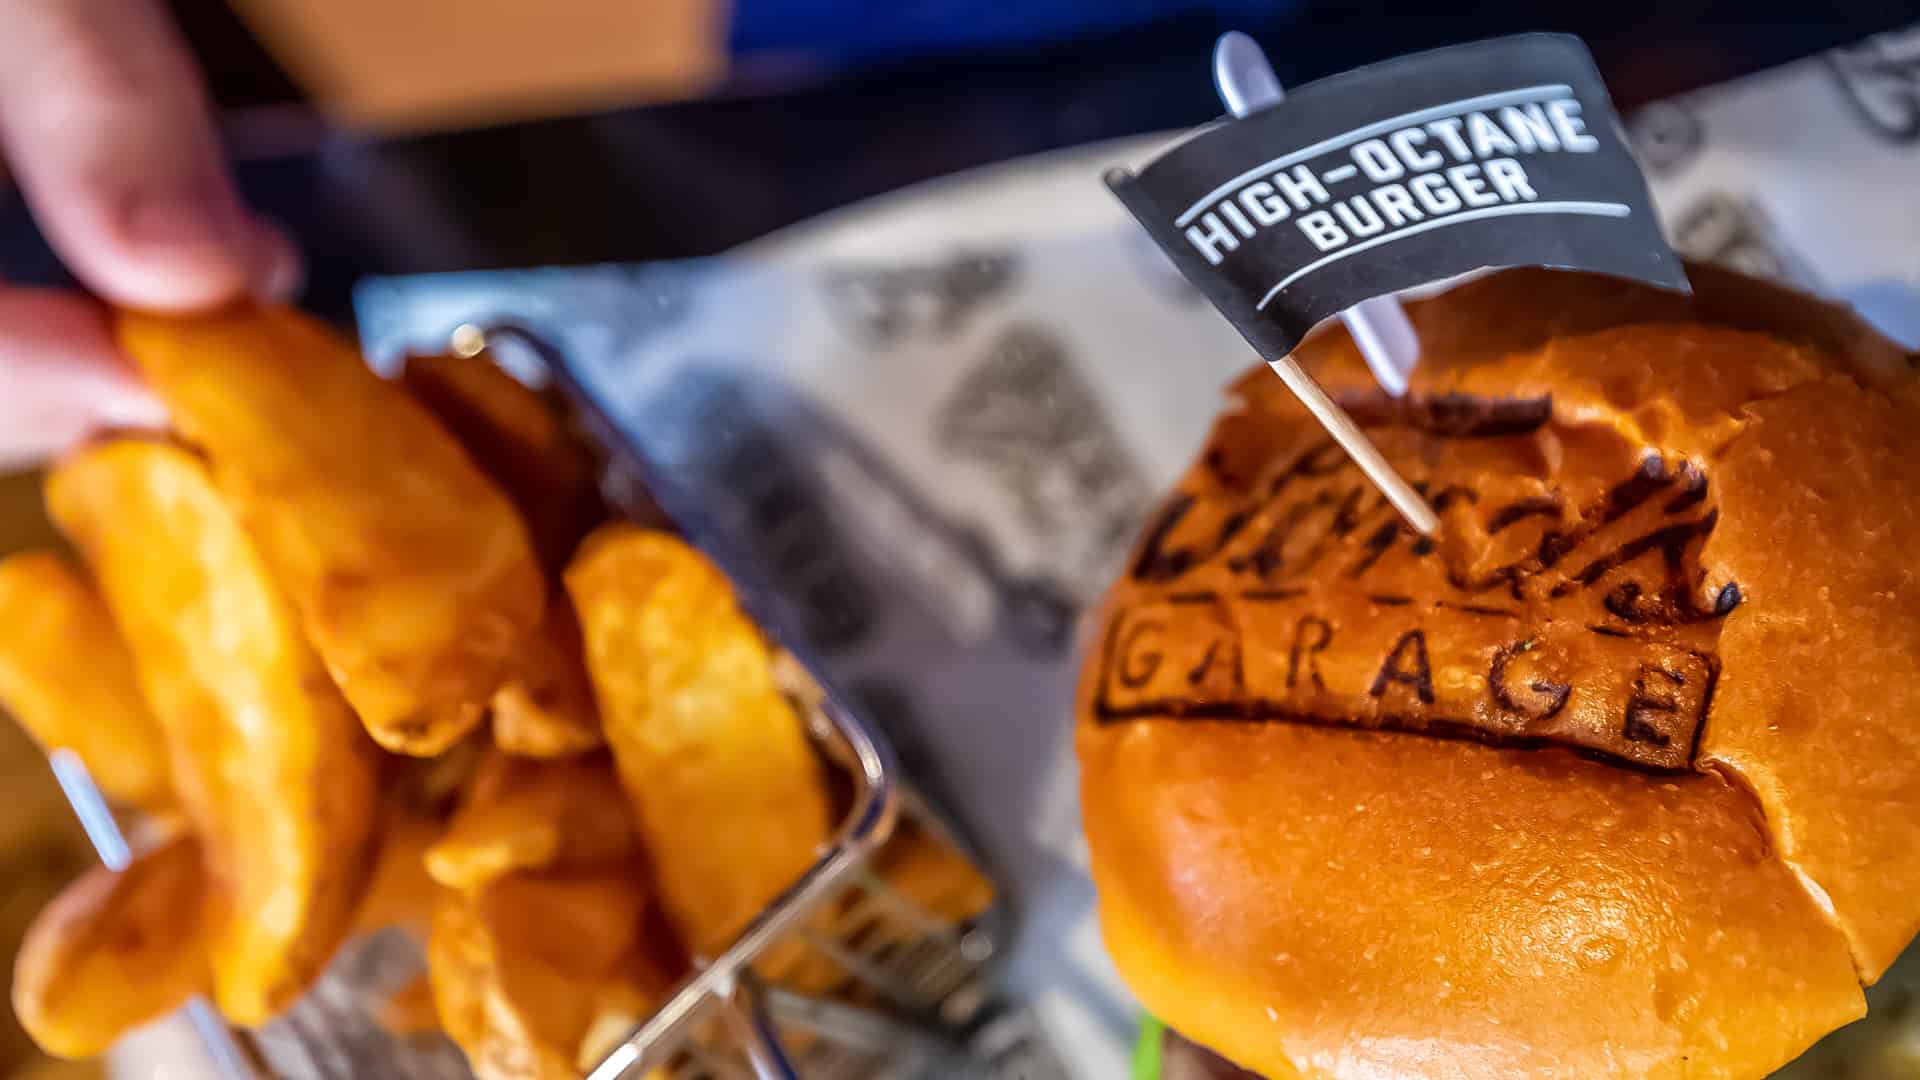 High Octane burger and fries from Ford’s Garage